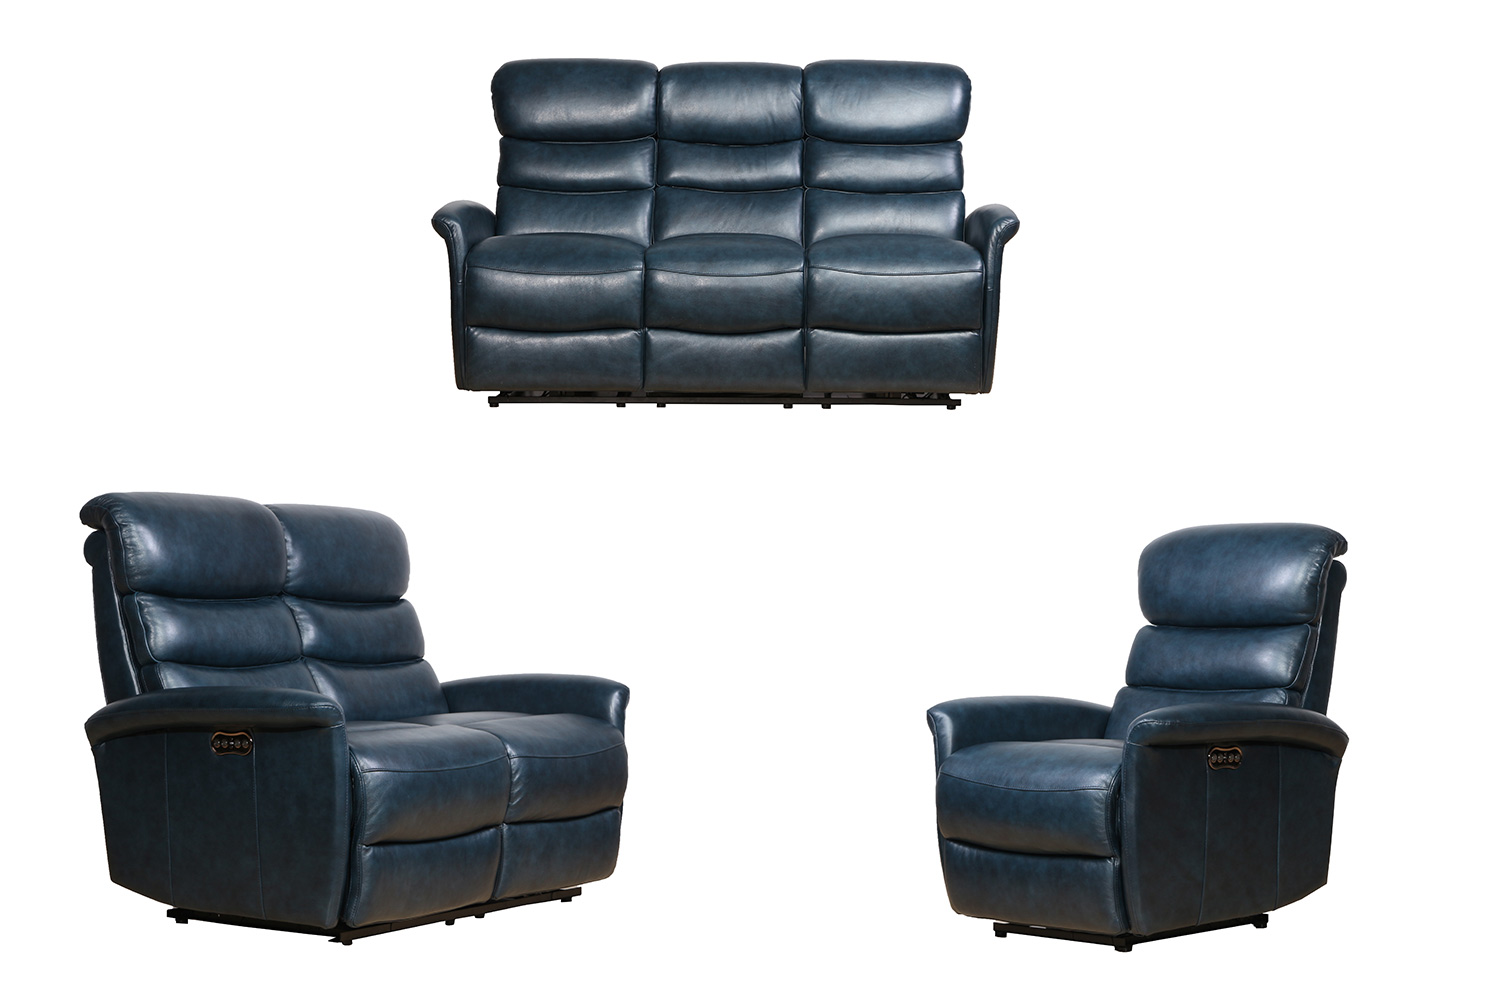 Barcalounger Kelso Power Reclining Sofa Set with Power Head Rests - Ryegate Sapphire Blue/Leather Match